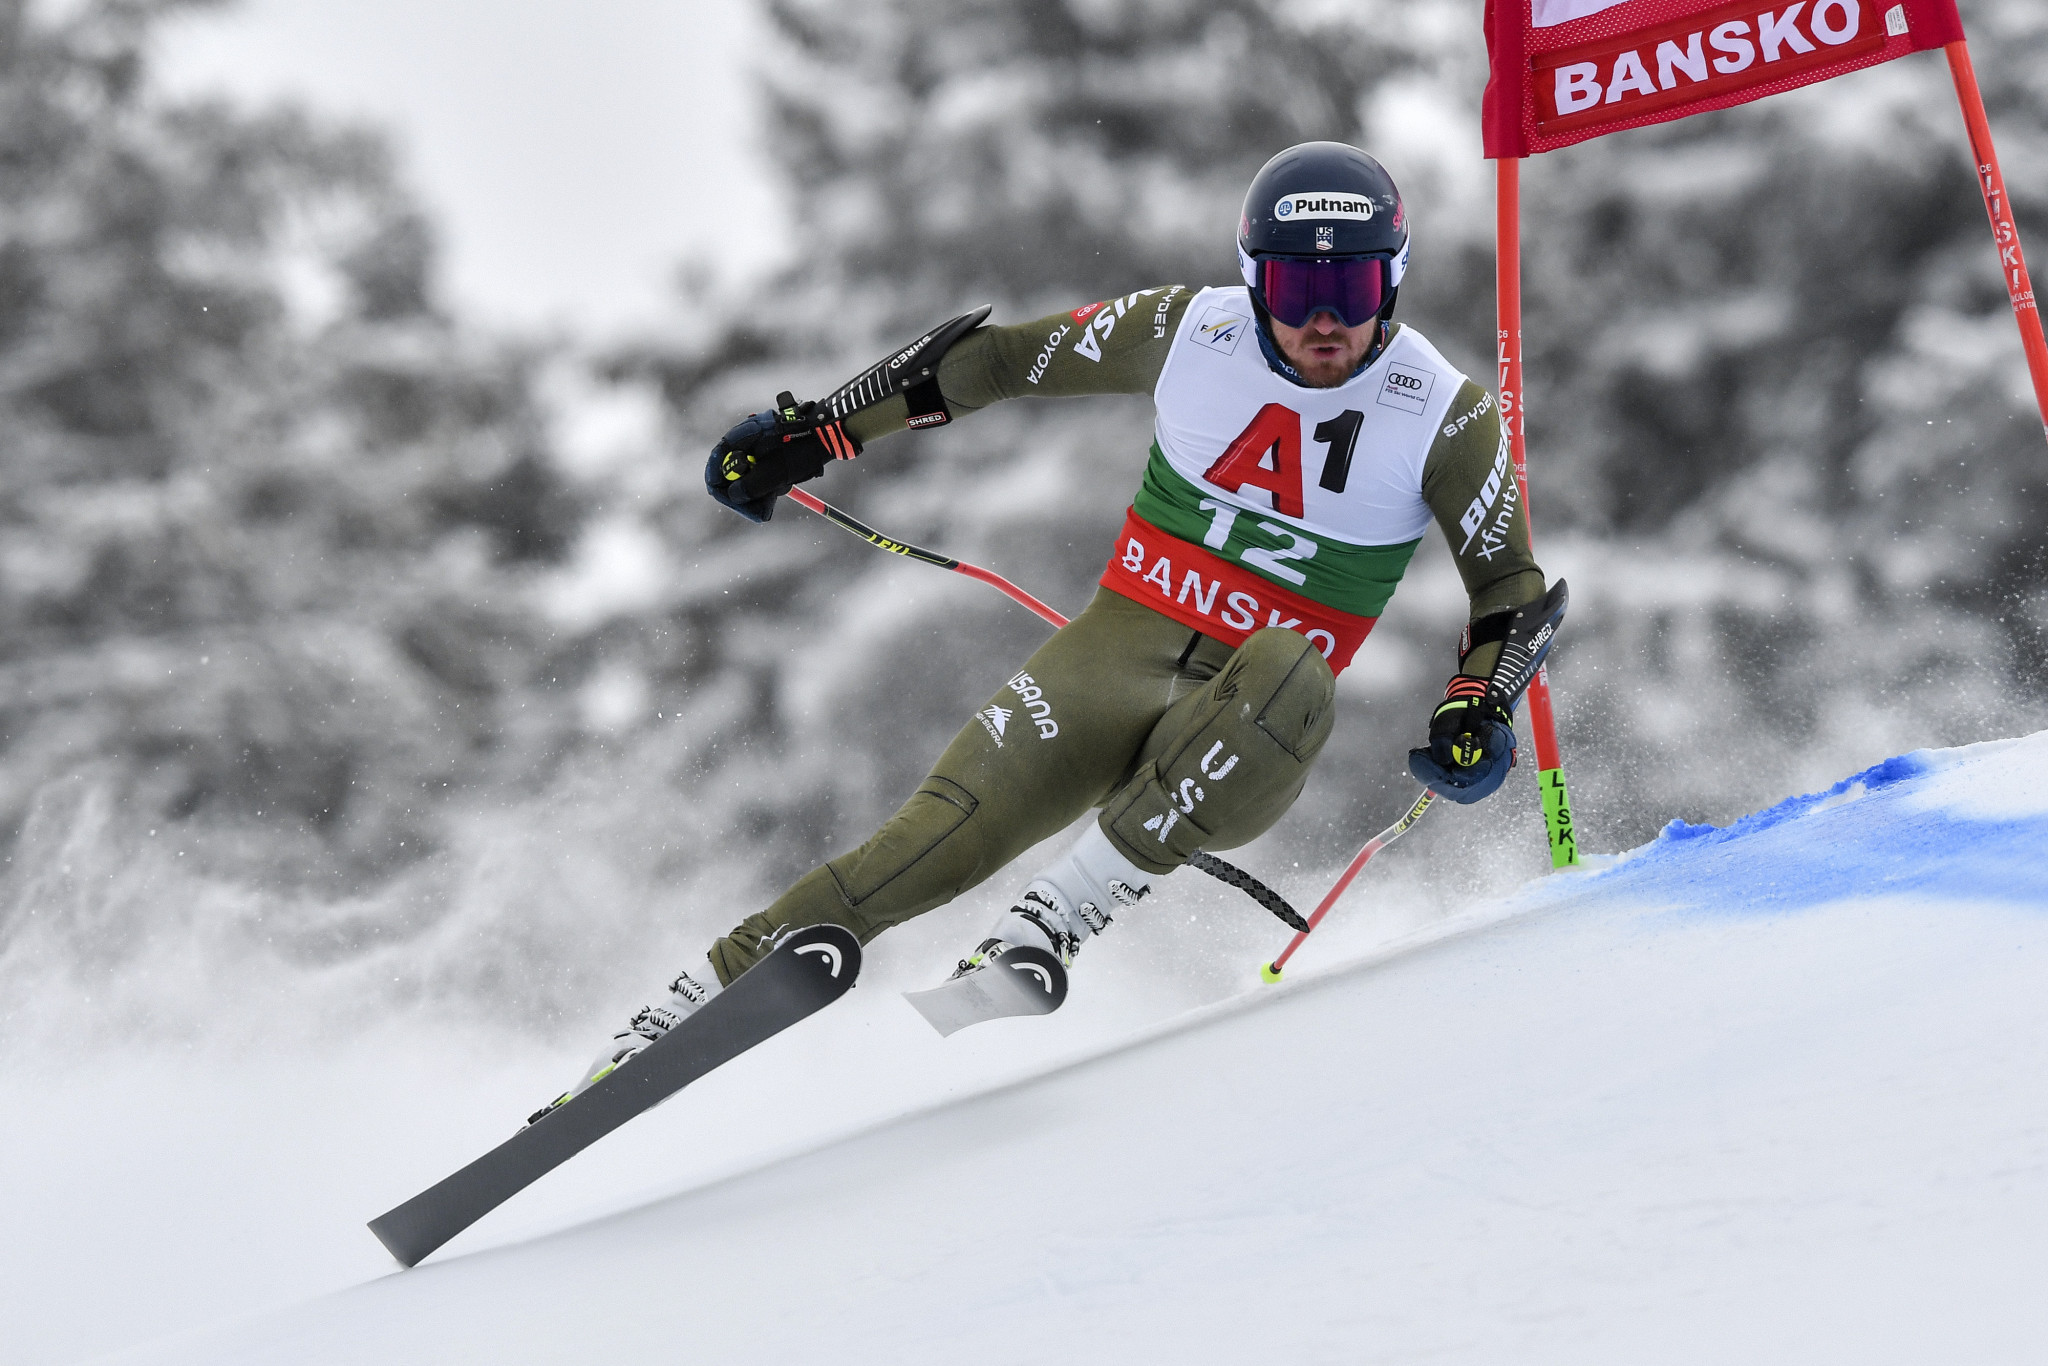 Olympic men's giant slalom gold medallist Ted Ligety is just one of U.S. Ski & Snowboard 's success stories under Luke Bodensteiner's guidance ©Getty Images